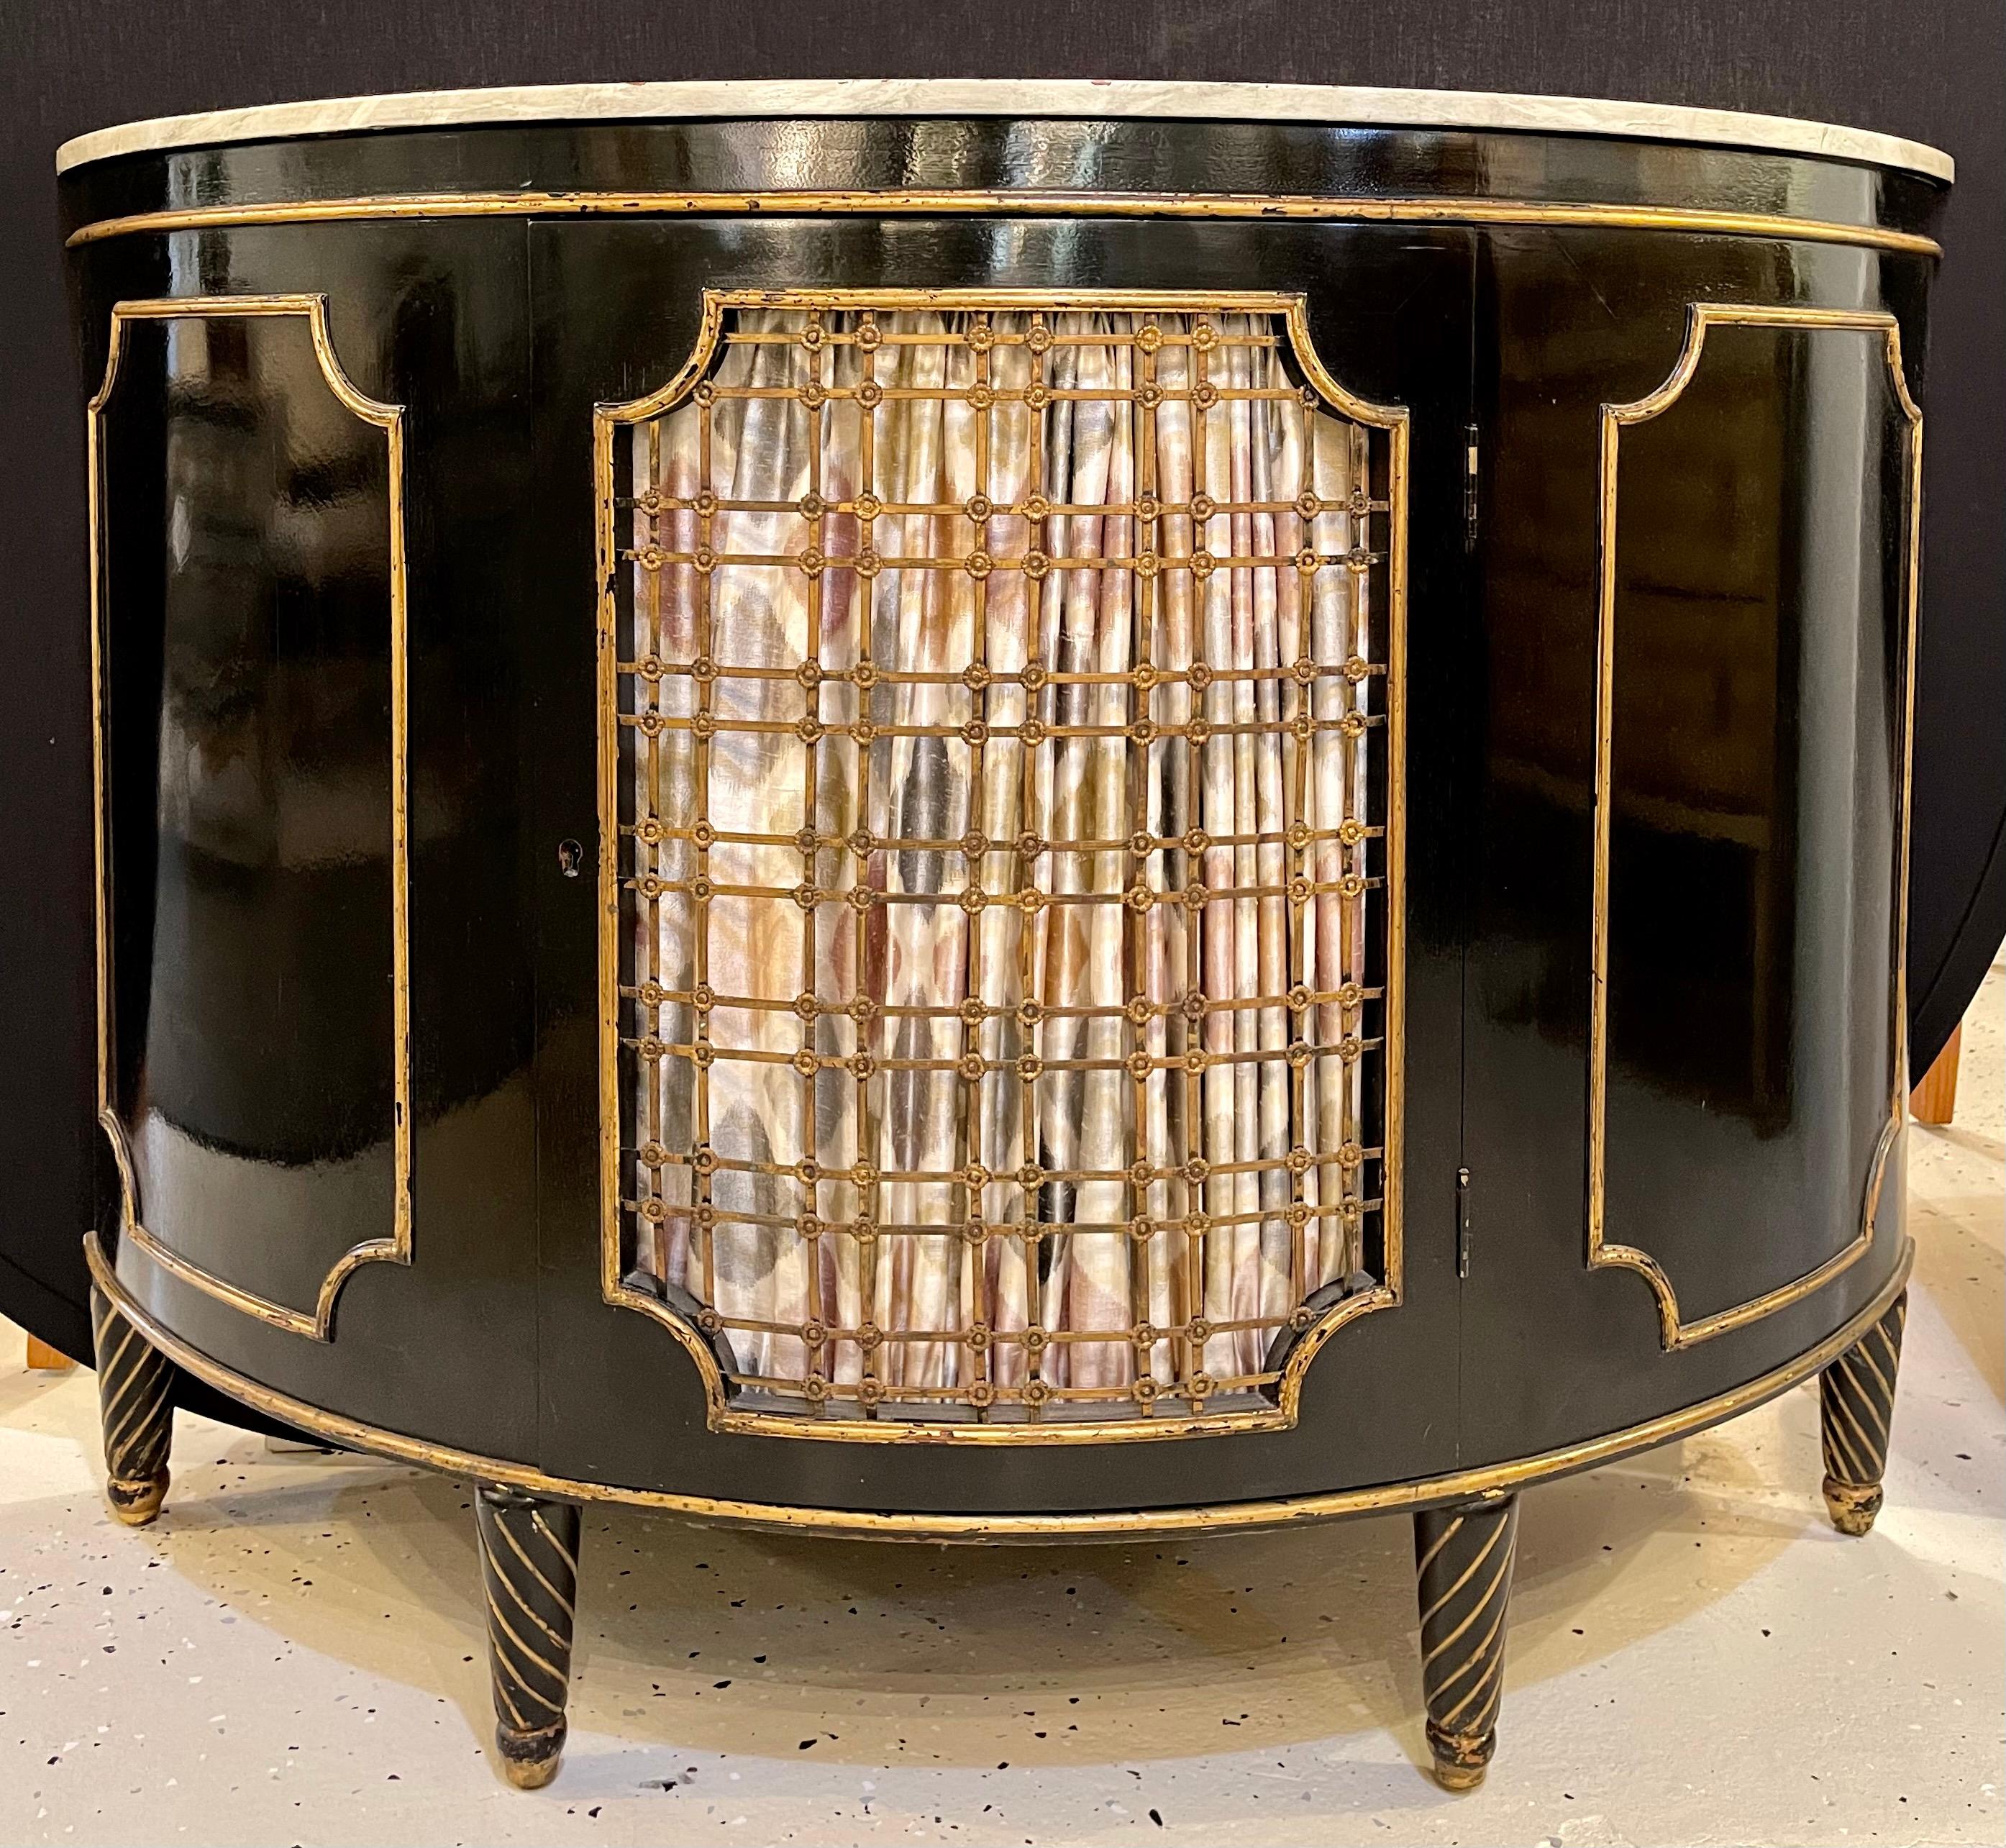 A demilune commode or server gilt gold and bronze decorated, Hollywood Regency style commode, chest or nightstand that is simply stunning. The sleek and clean lines leading to a deep bow front having bronze grilled door front opening to a shelved